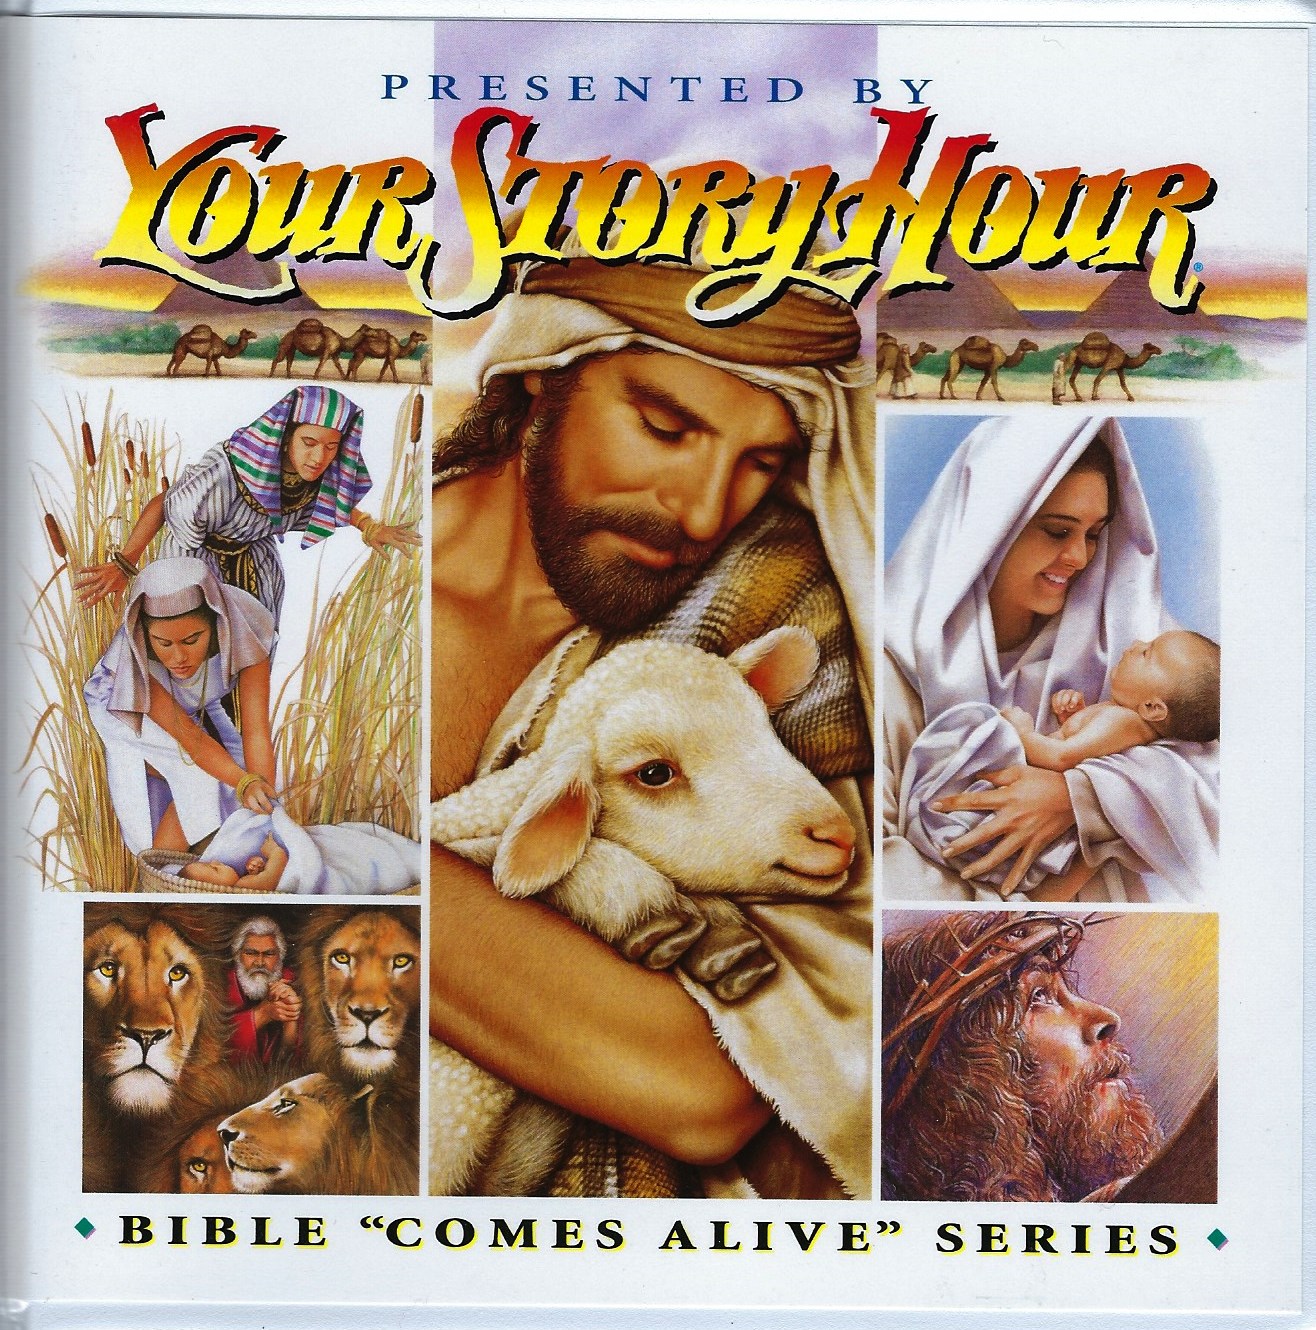 BIBLE COMES ALIVE SERIES CD ALBUM 1 Your Story Hour